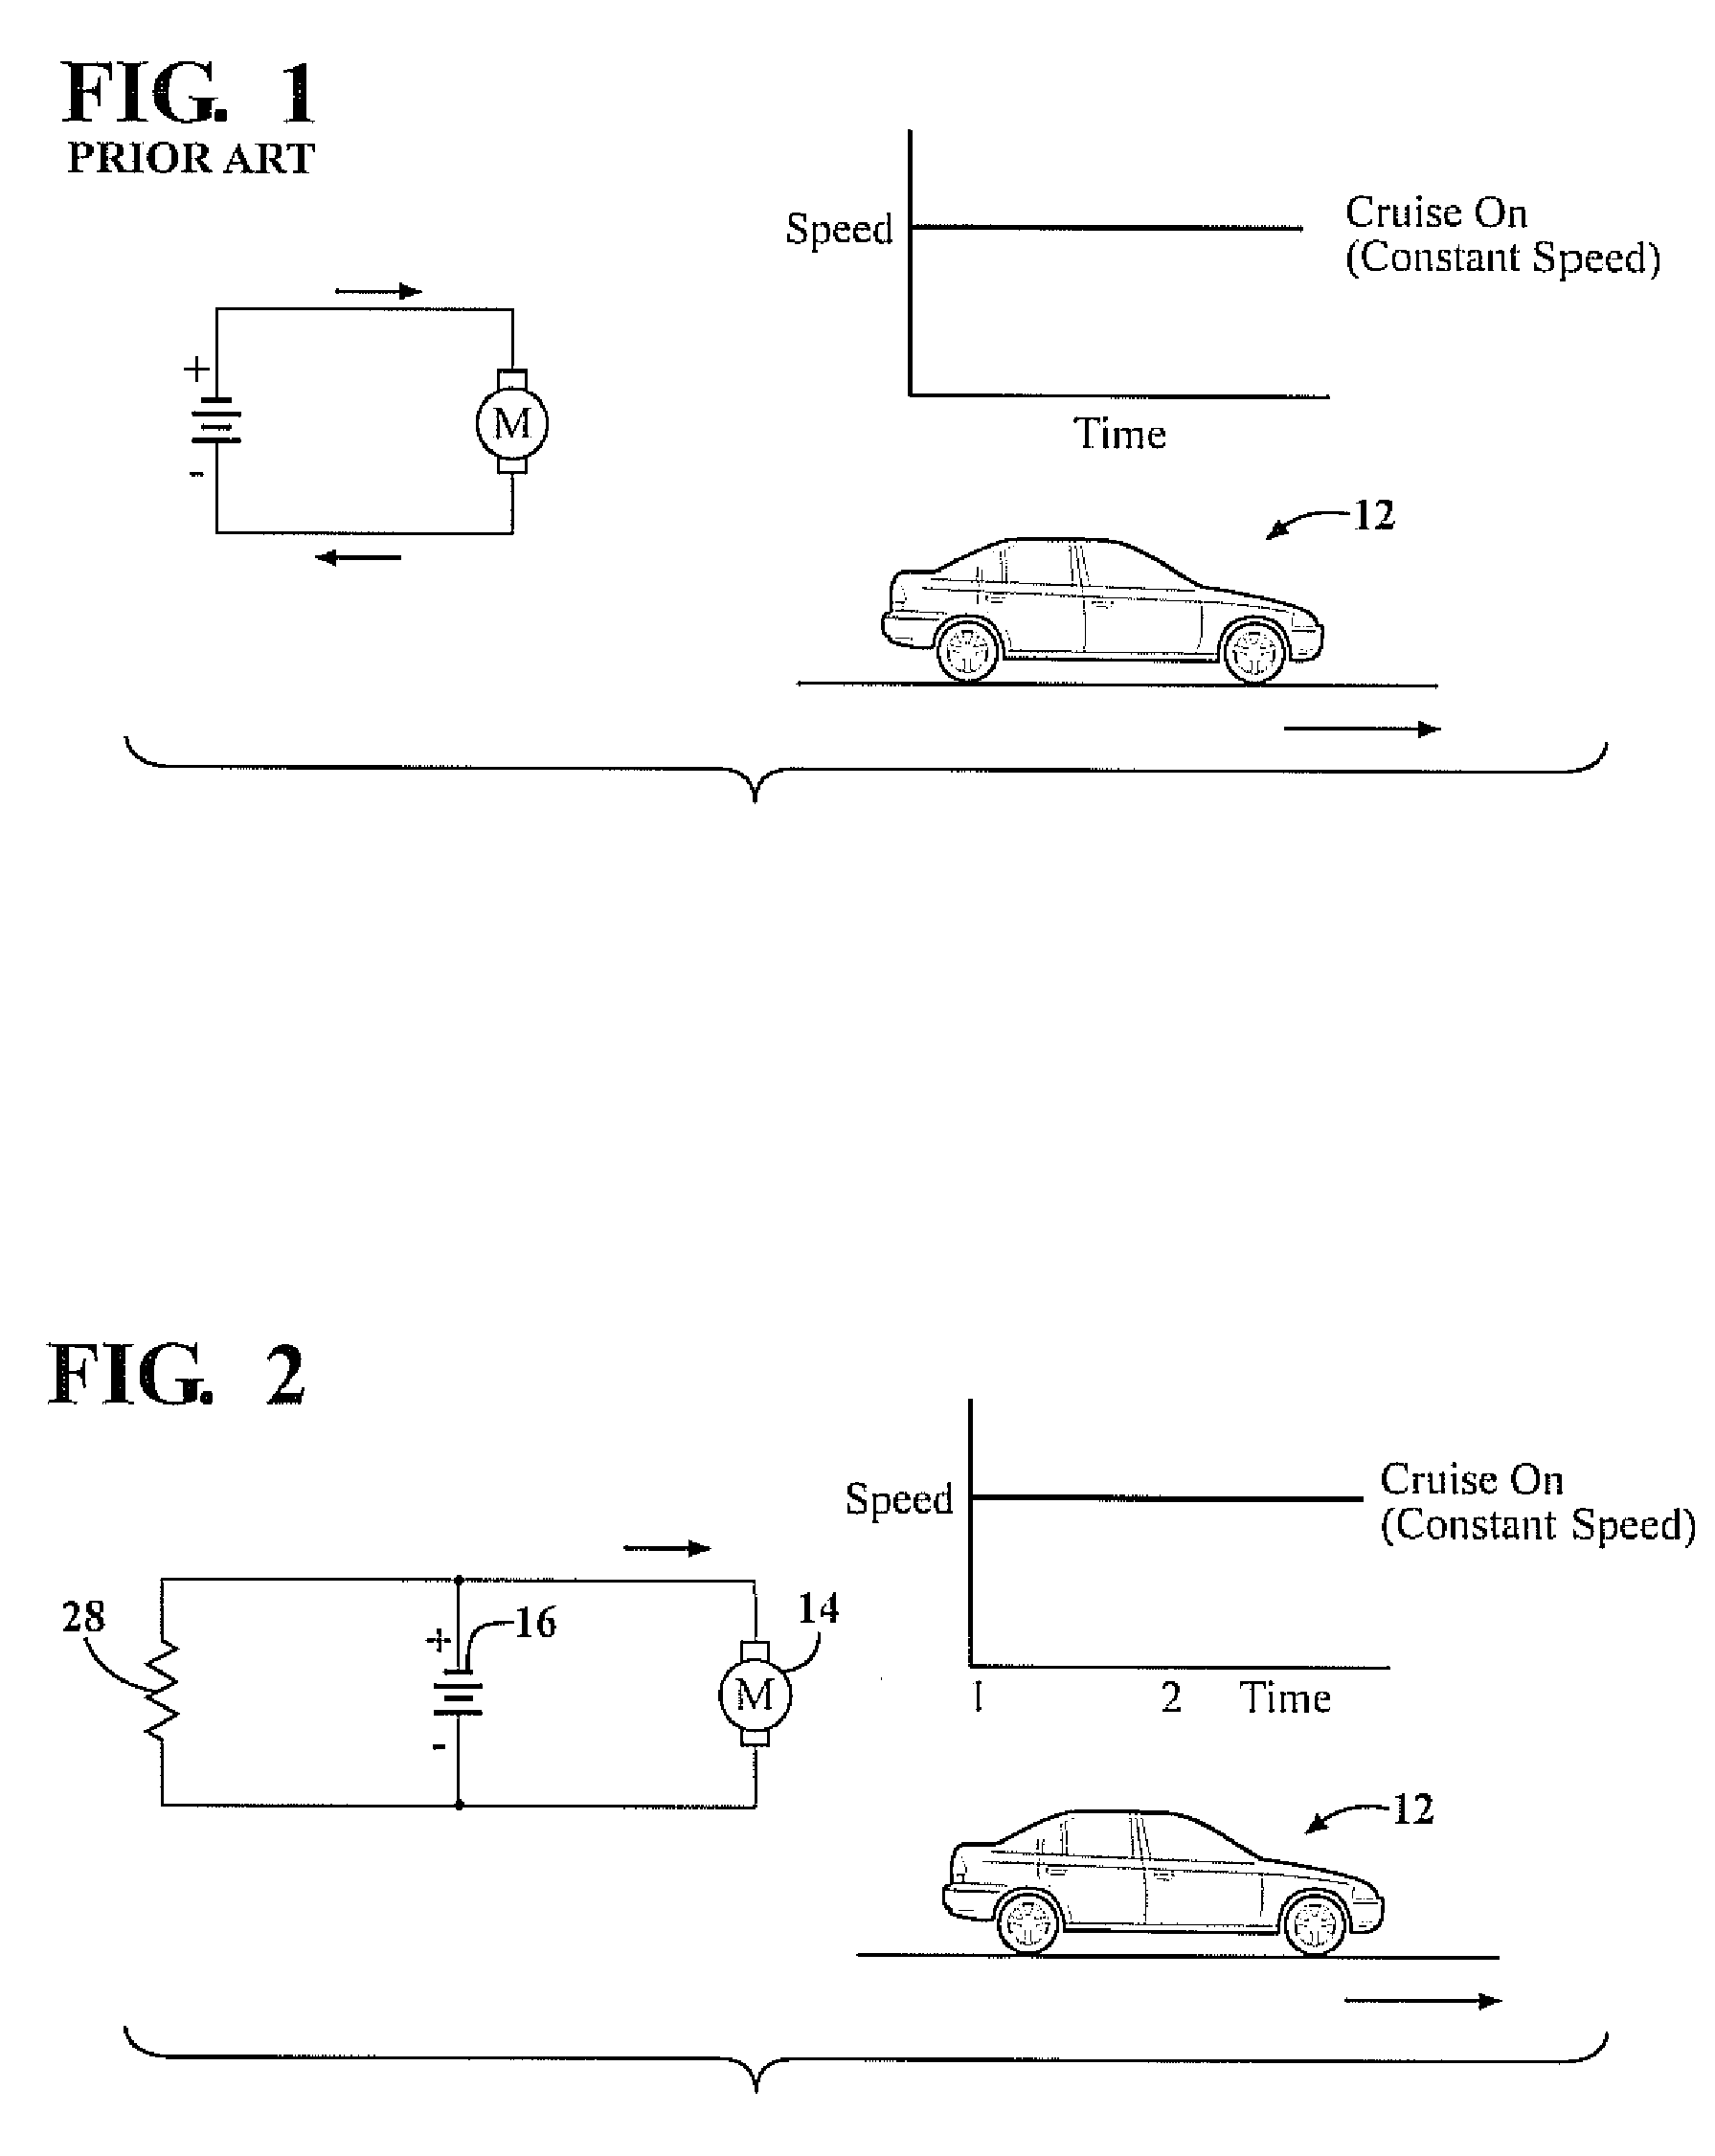 System and method for maintaining the speed of a vehicle